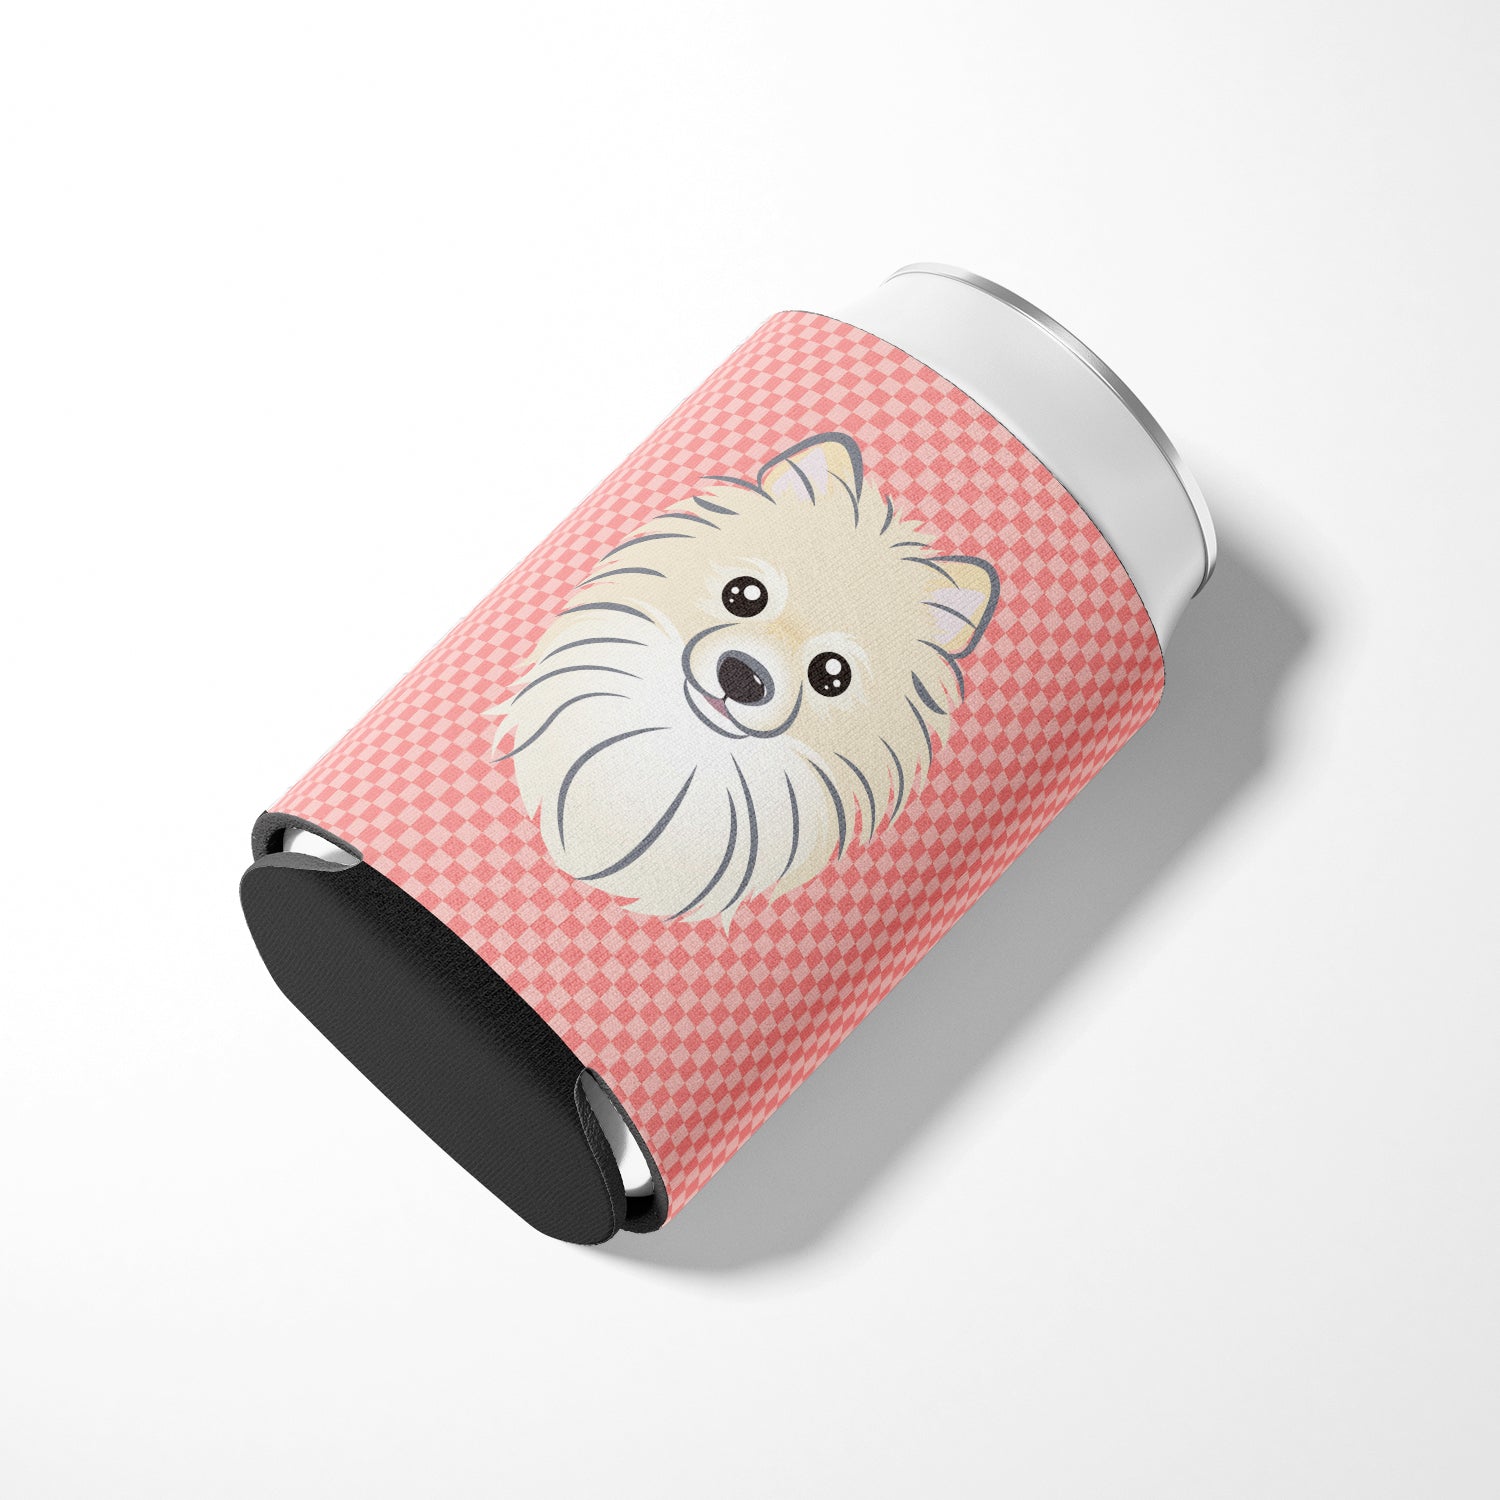 Checkerboard Pink Pomeranian Can or Bottle Hugger BB1207CC